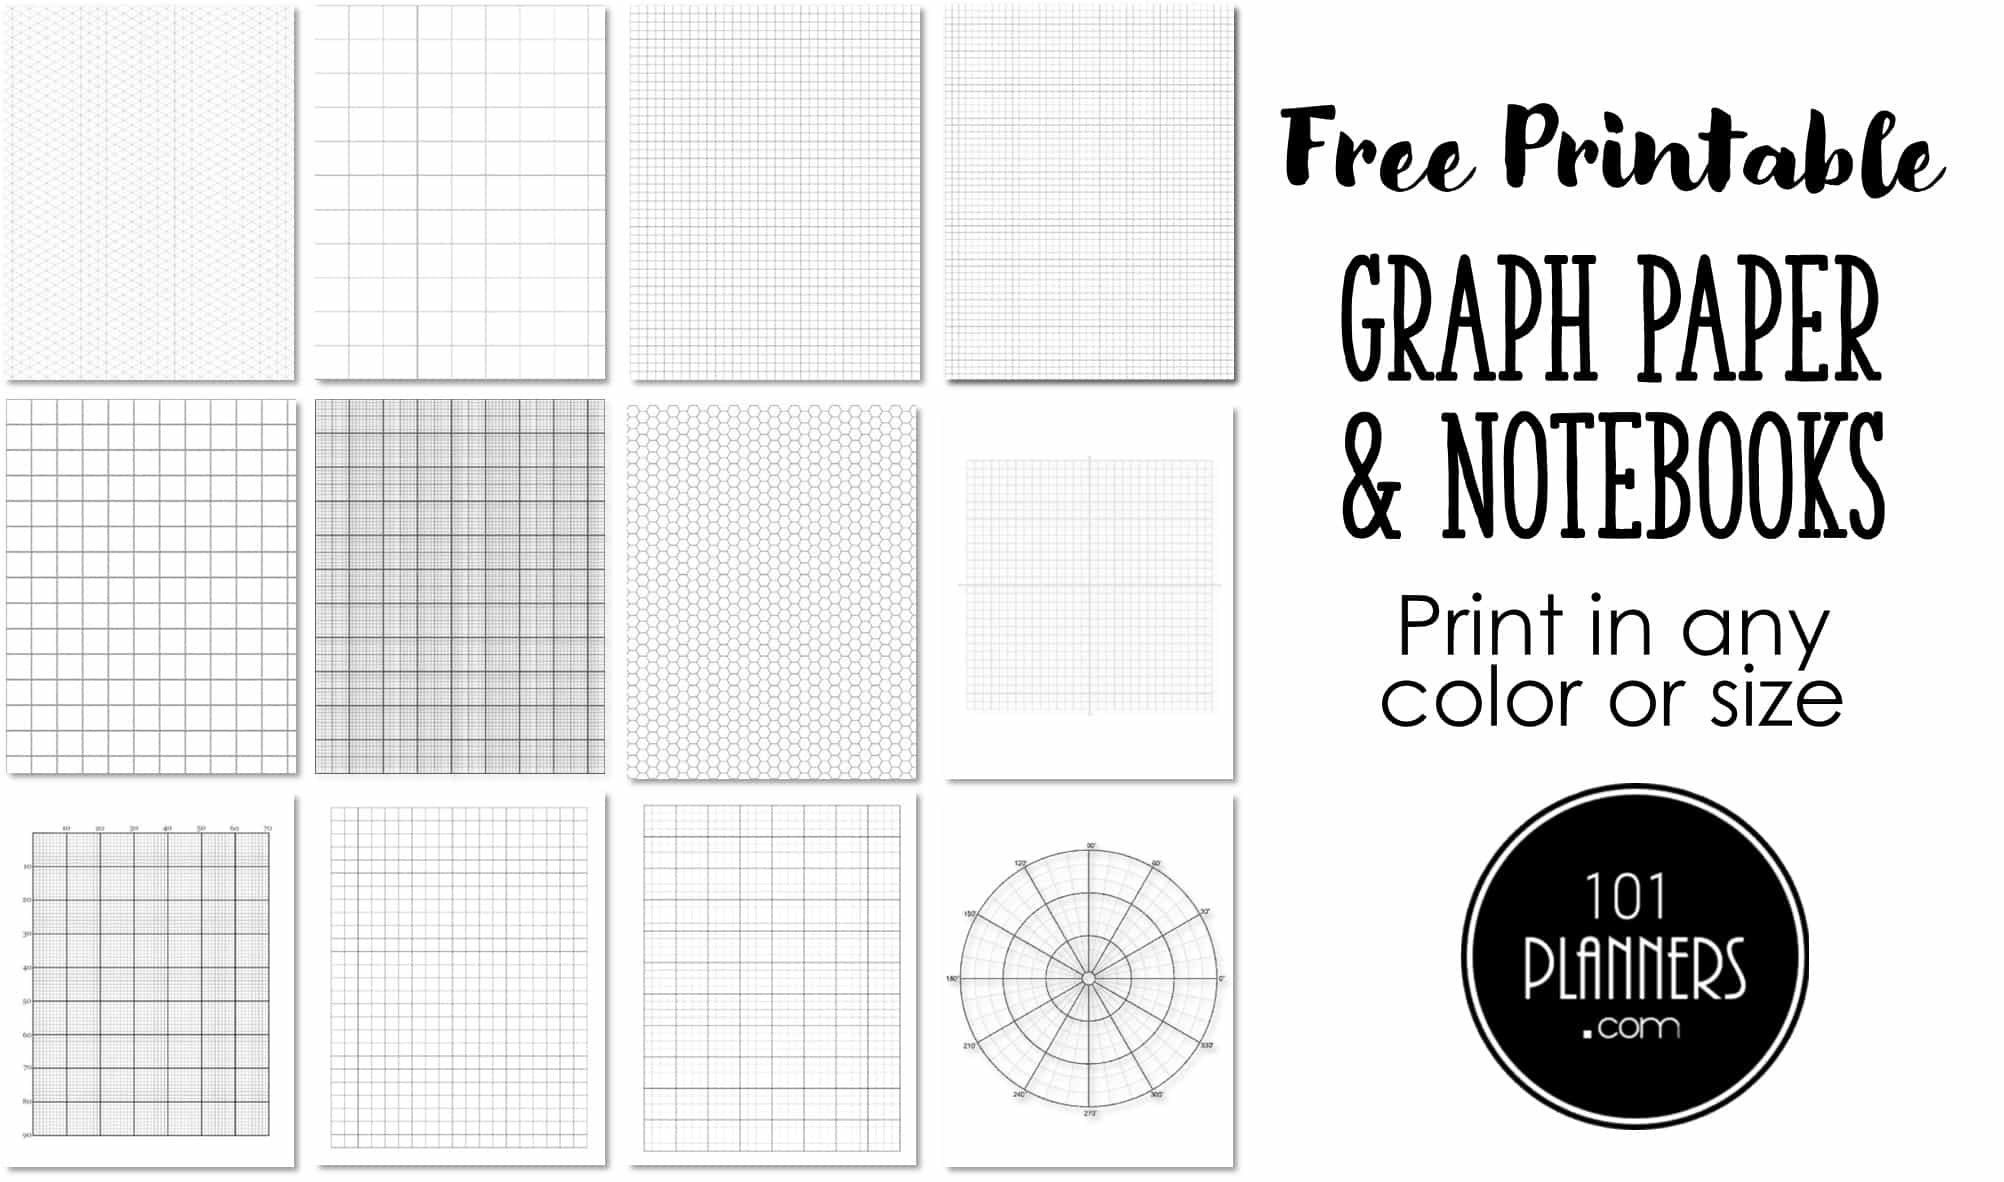 FREE Printable Graph Paper in Any Color | Word, PDF, jpg or png